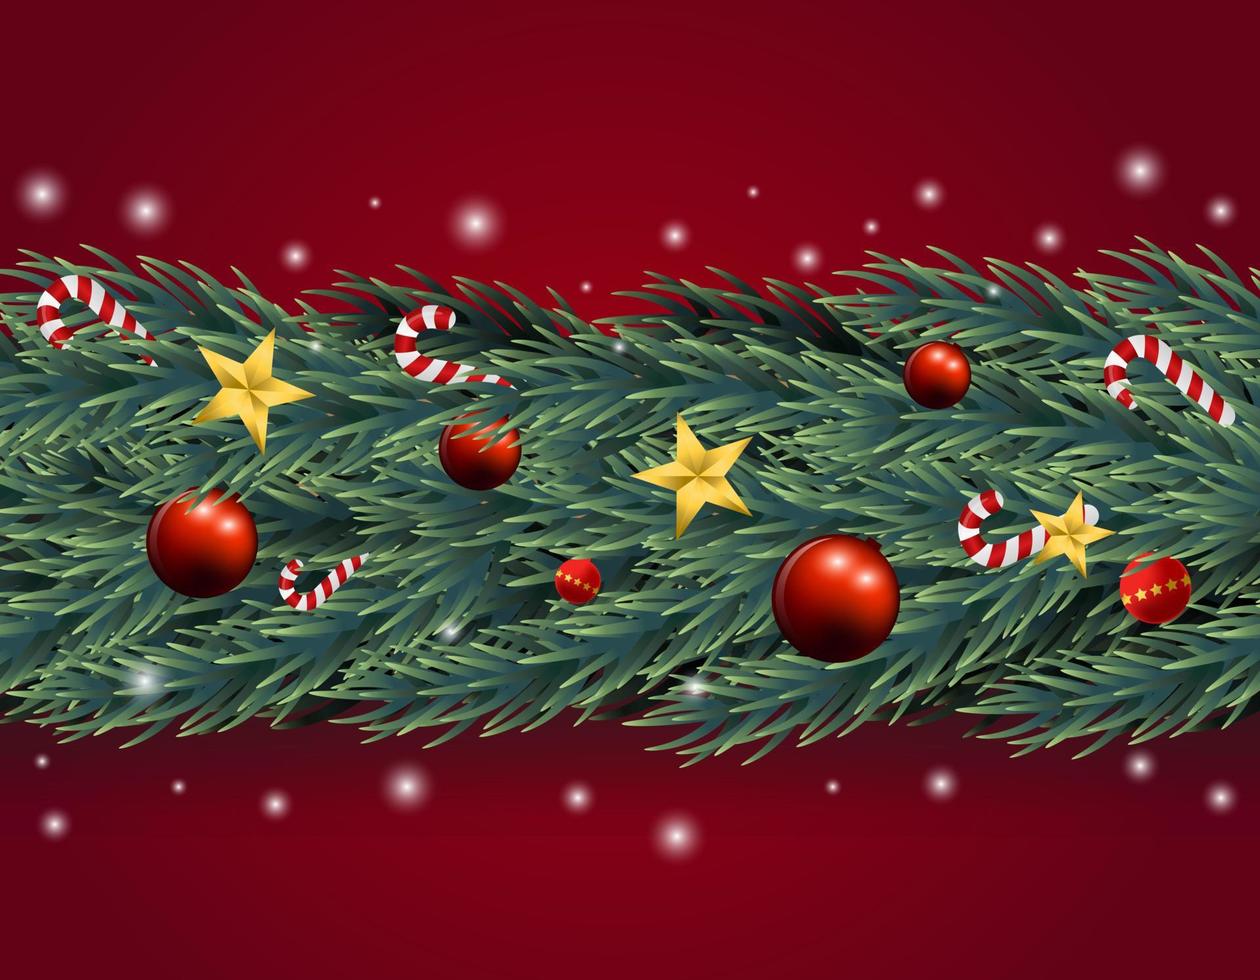 Red Christmas background with pine leaves, dwarfs, bells and stars on a red scene. vector